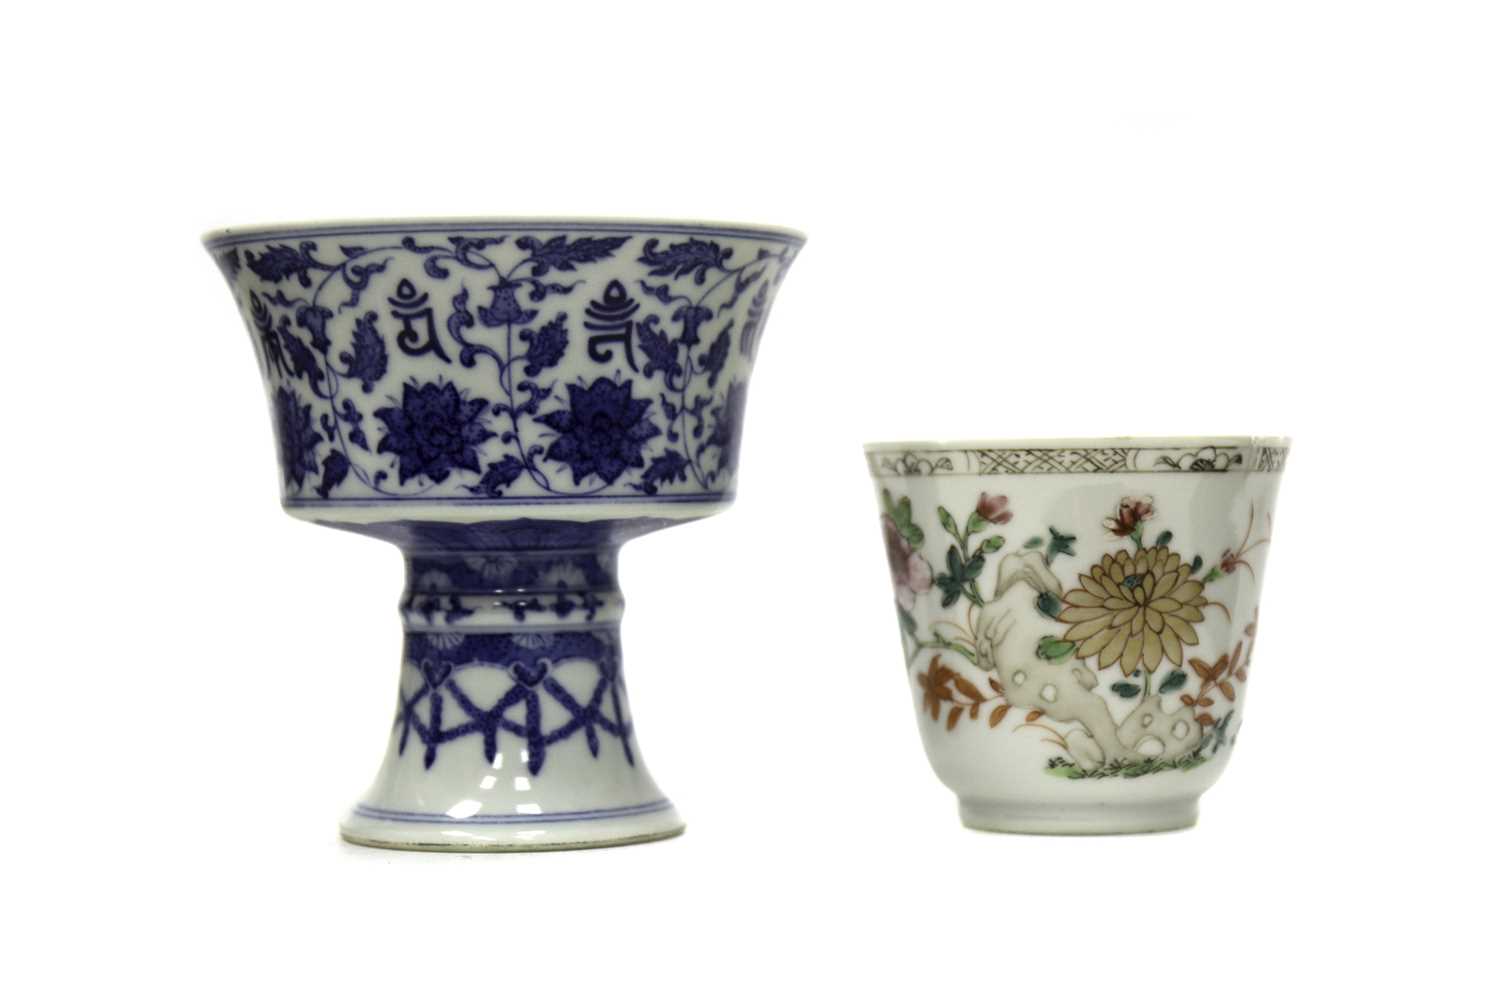 Lot 1722 - A LATE 18TH/EARLY 19TH CENTURY CHINESE CUP AND A BLUE AND WHITE STEMMED CUP